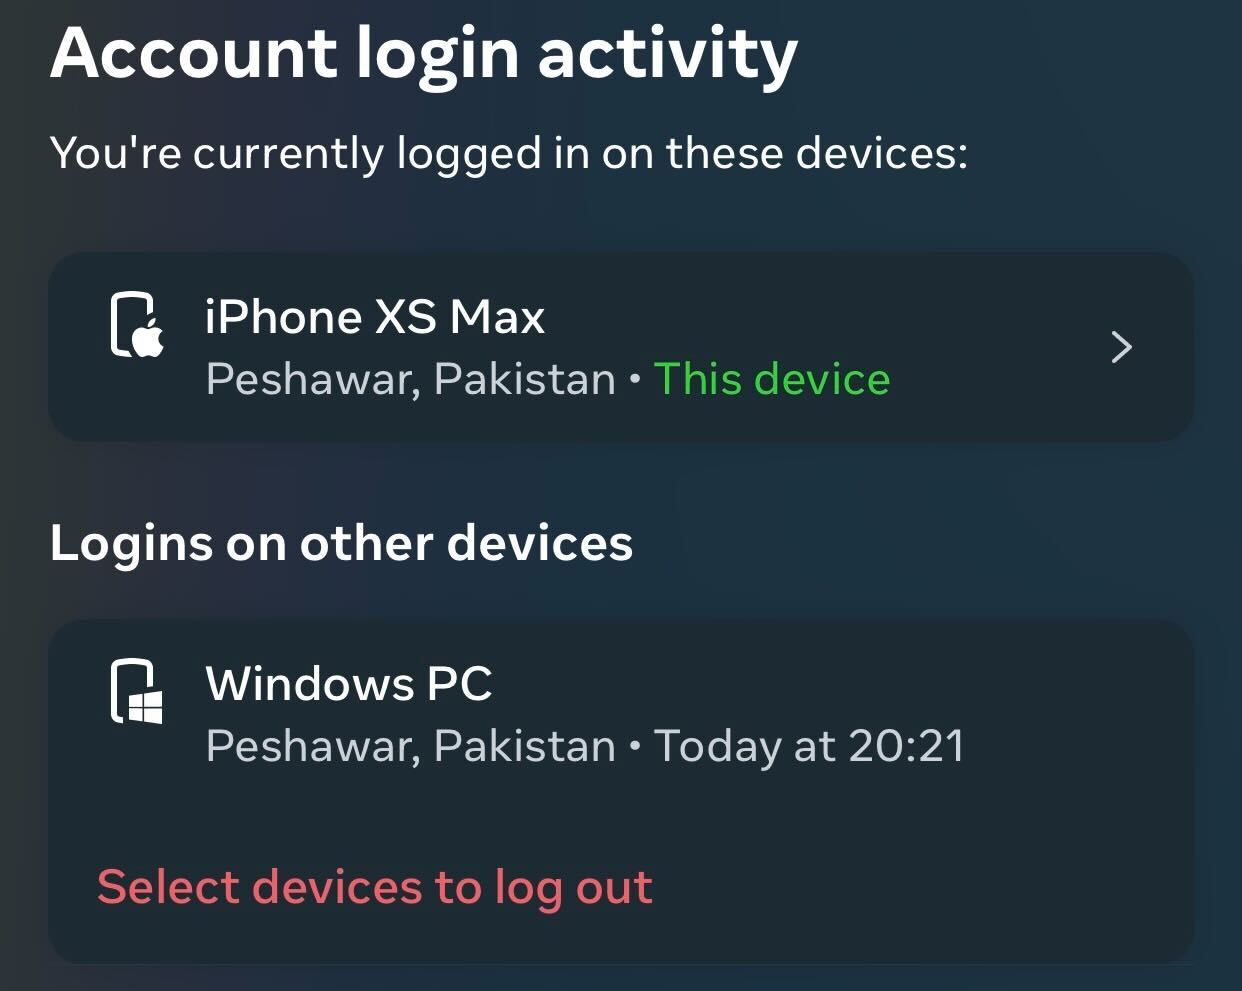 Opening the settings to log out Facebook account from suspicious devices.